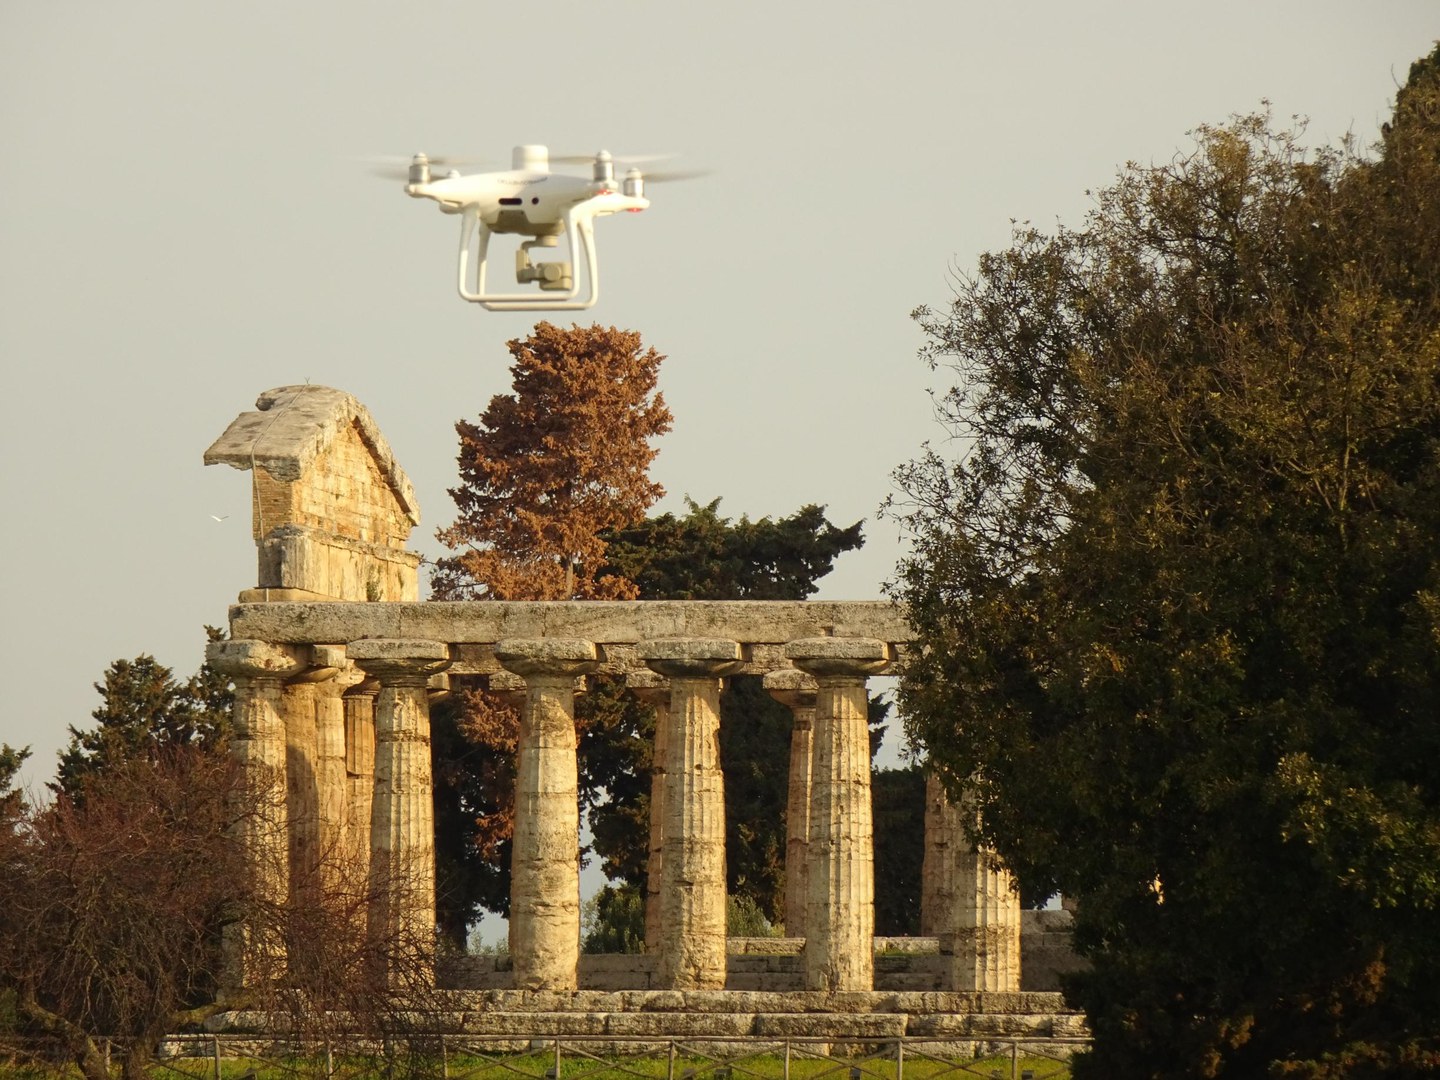 2023 Drone with multispectral camera in front of Athena temple in Paestum